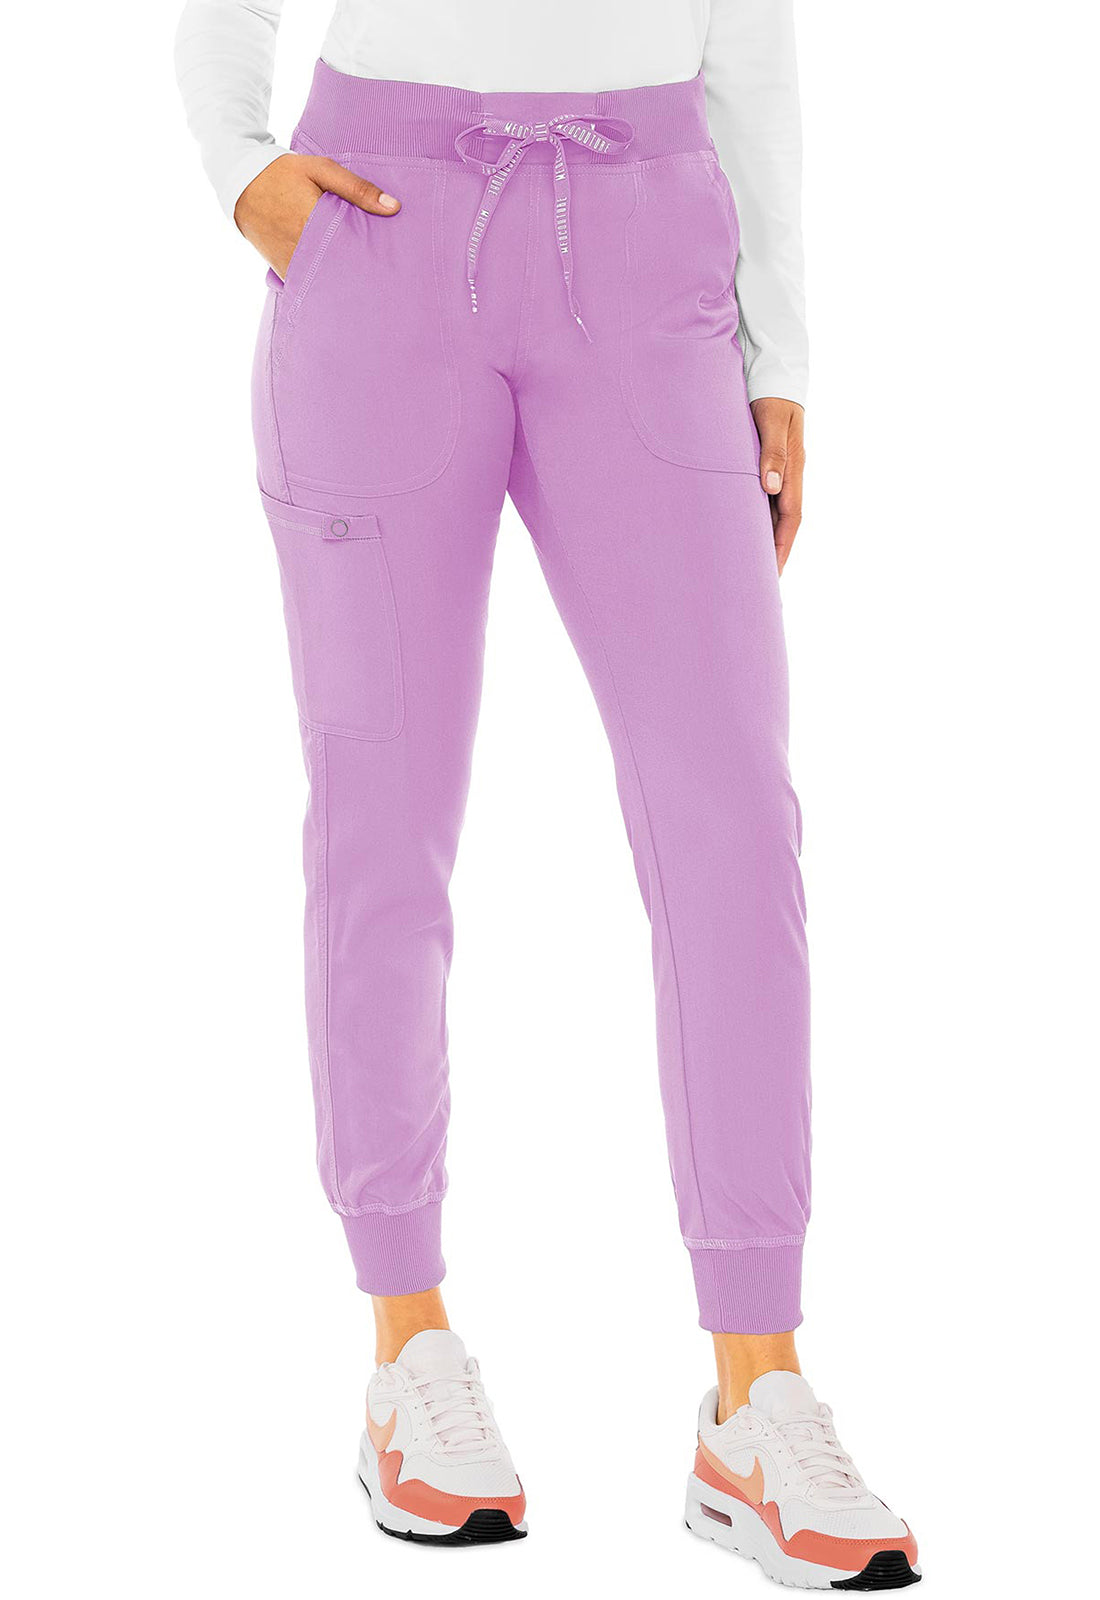 Med Couture Touch Yoga Jogger Pant (15 Colors XS-3XL Petite Length)